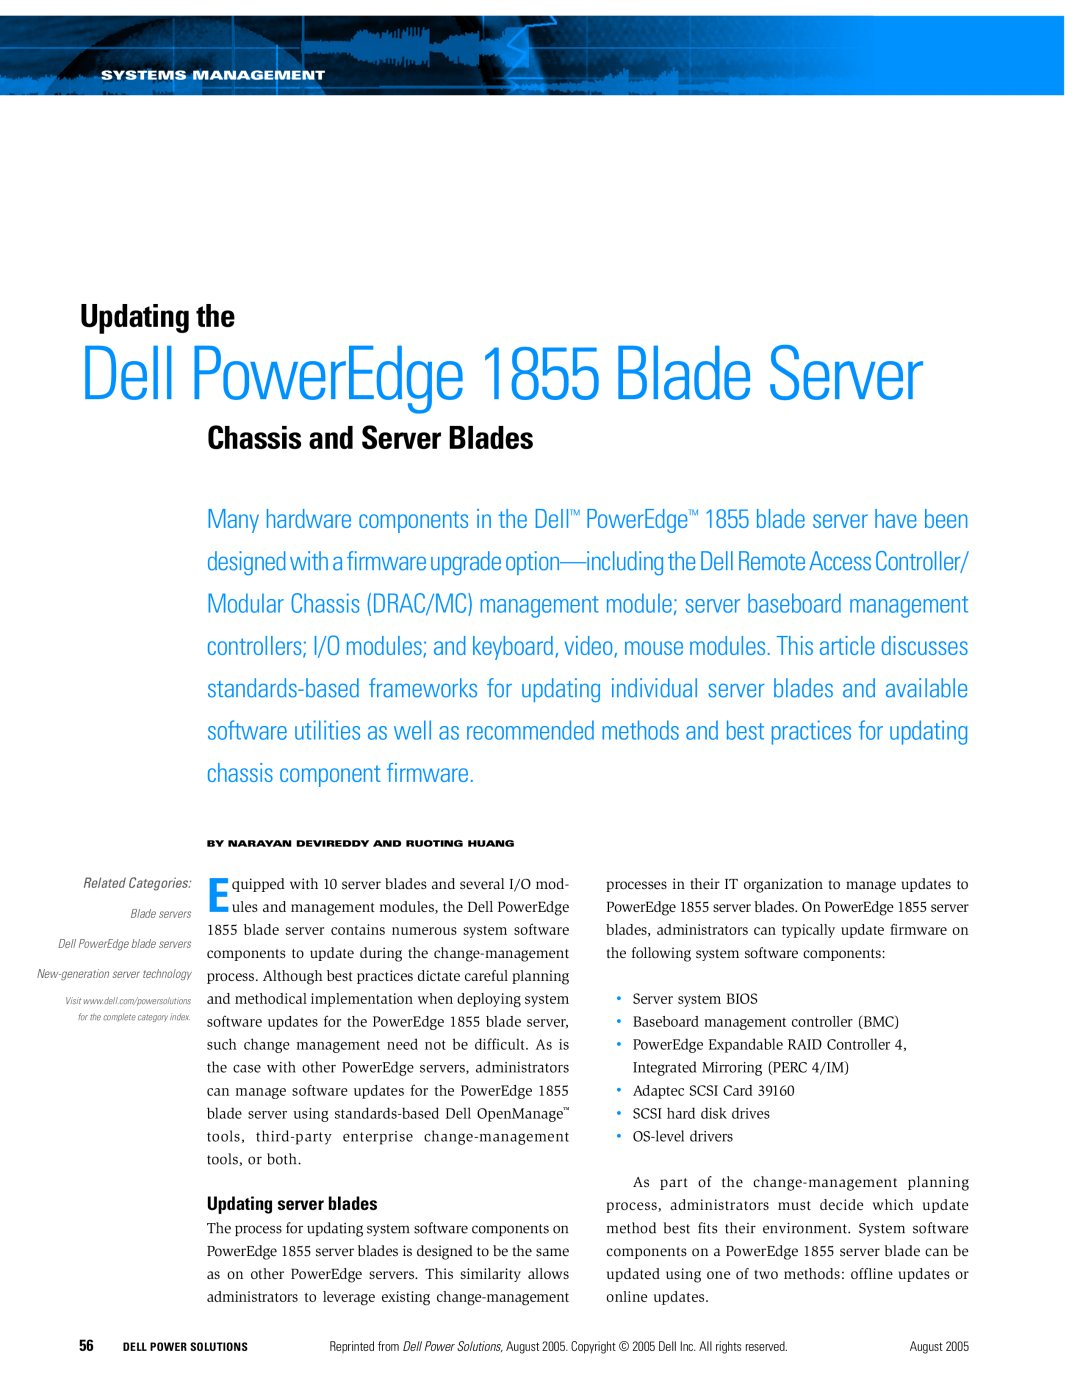 Dell manual Updating server blades, Dell PowerEdge 1855 Blade Server, Updating the, Chassis and Server Blades 